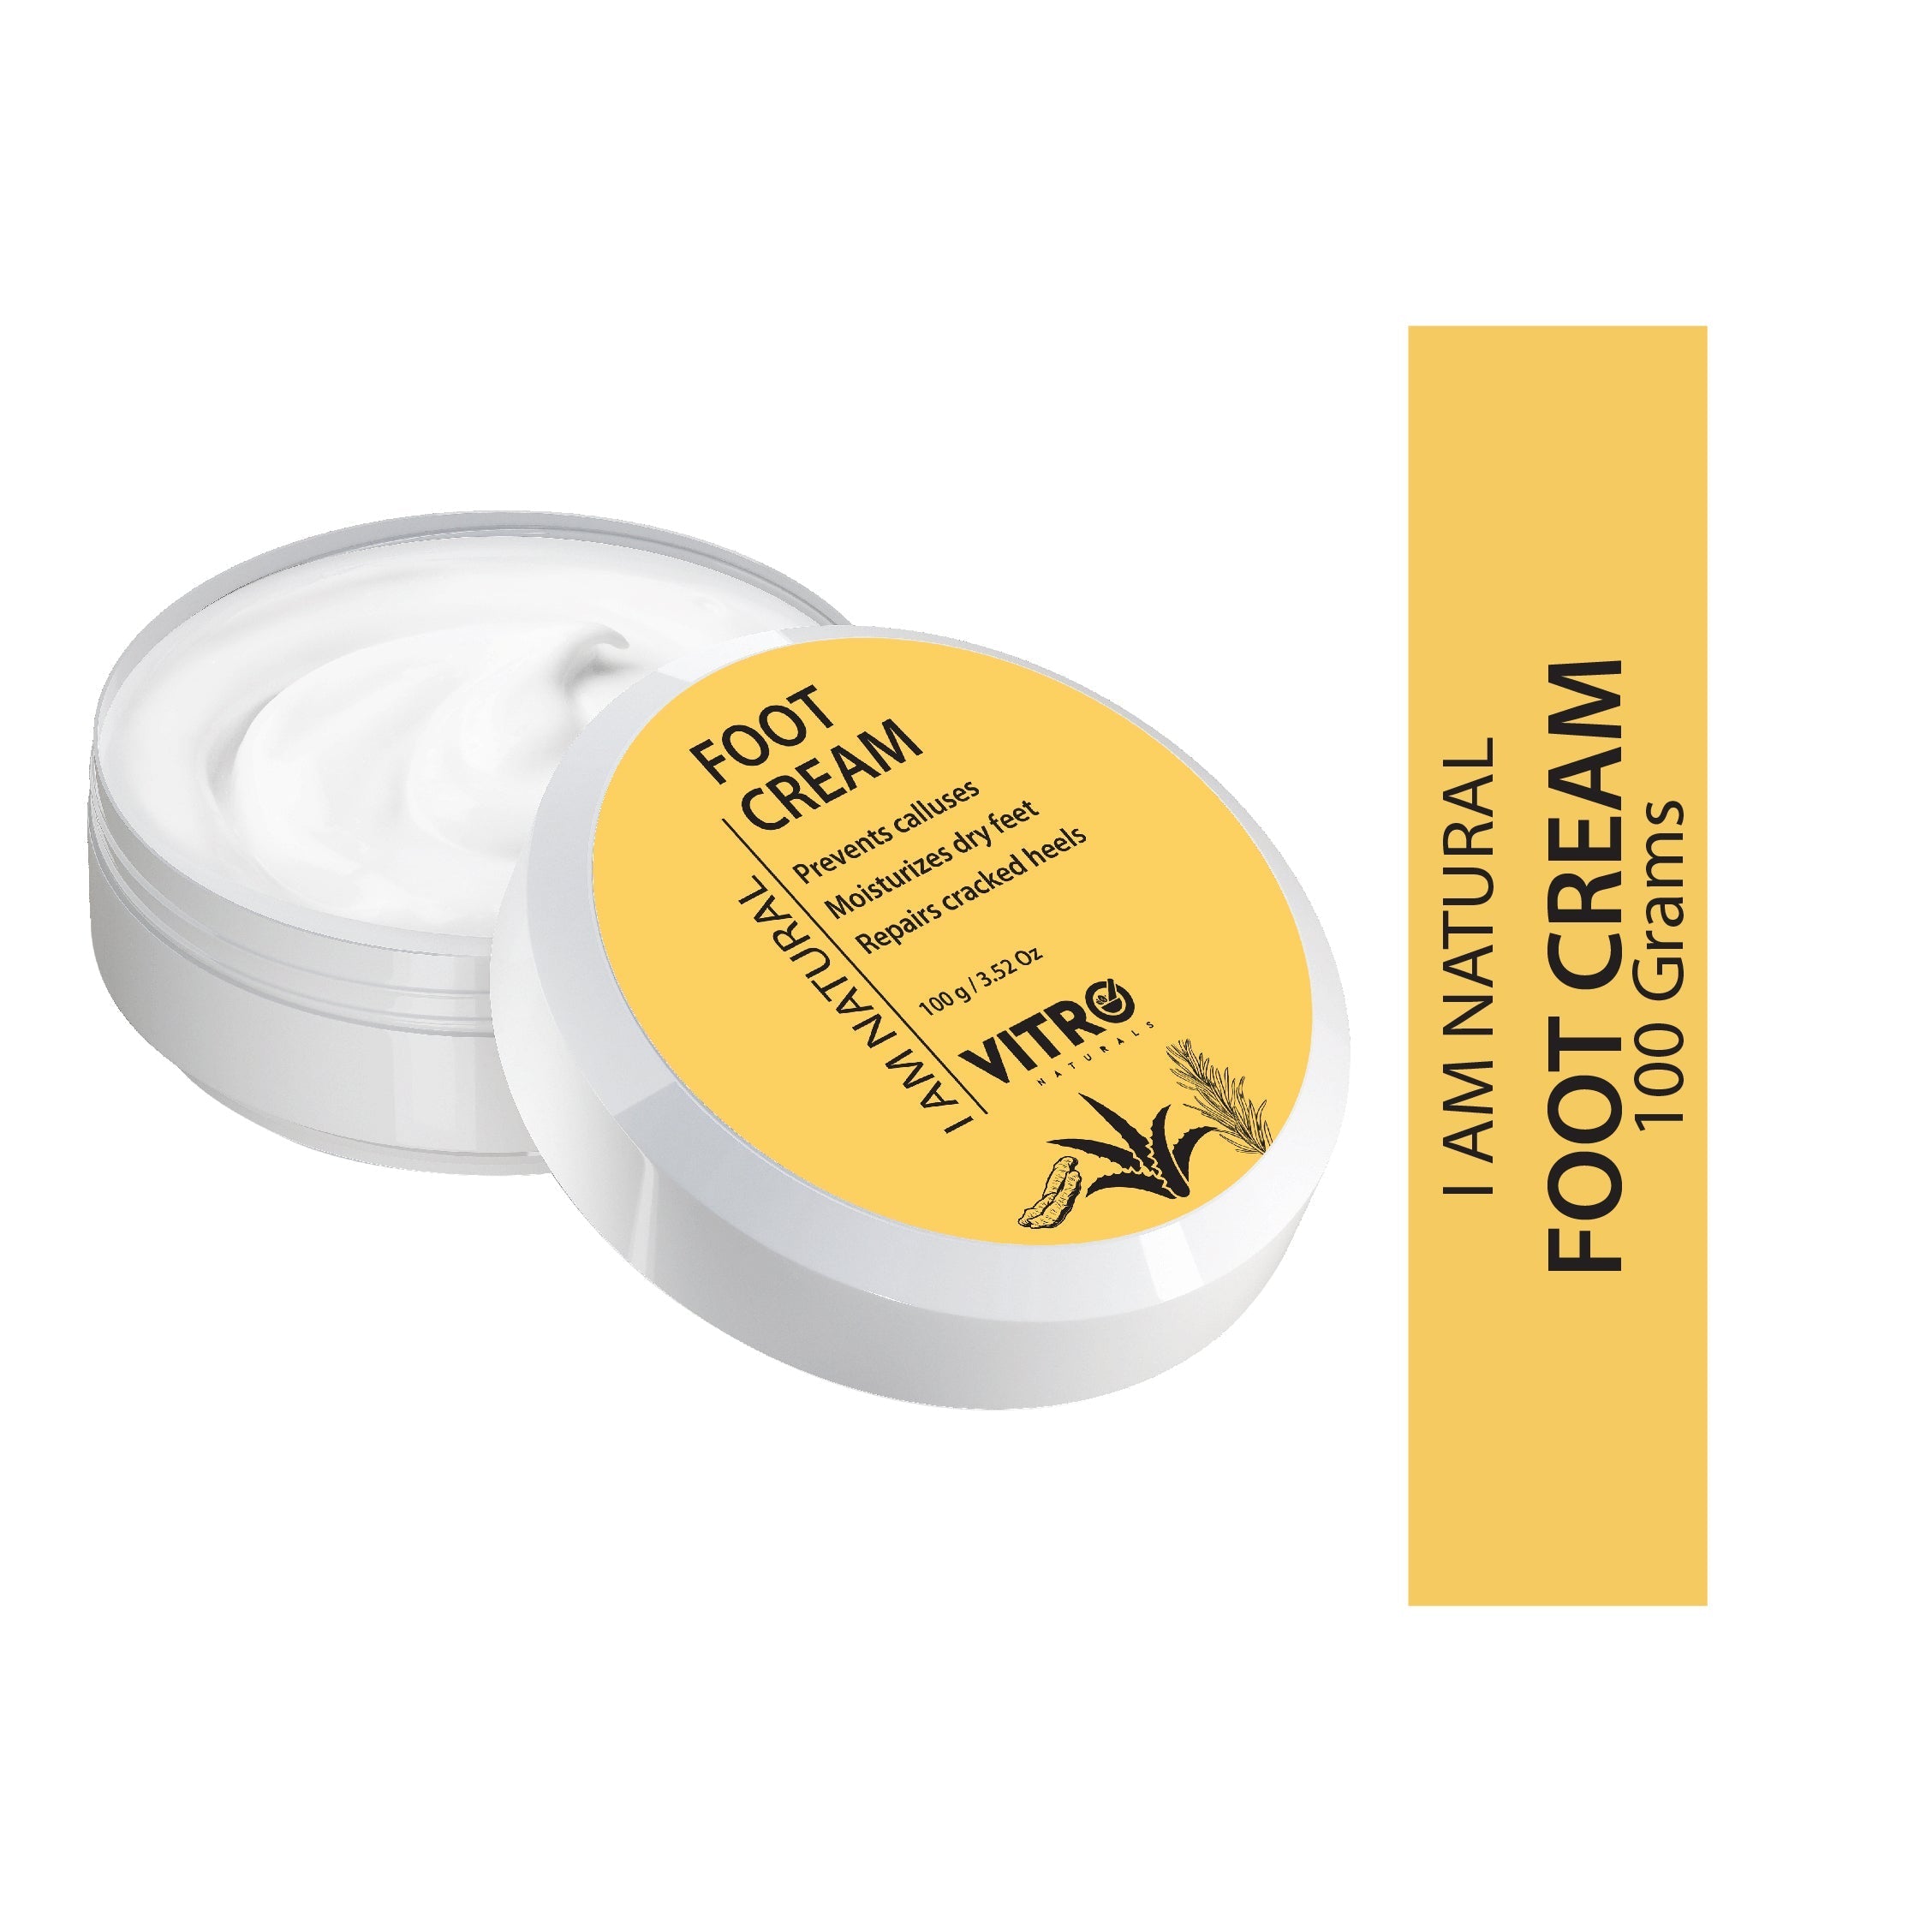 BUY 1 GET 1 FREE | FOOT & TOE CARE CREAM FOR CRACKED HEELS & DRY SKIN